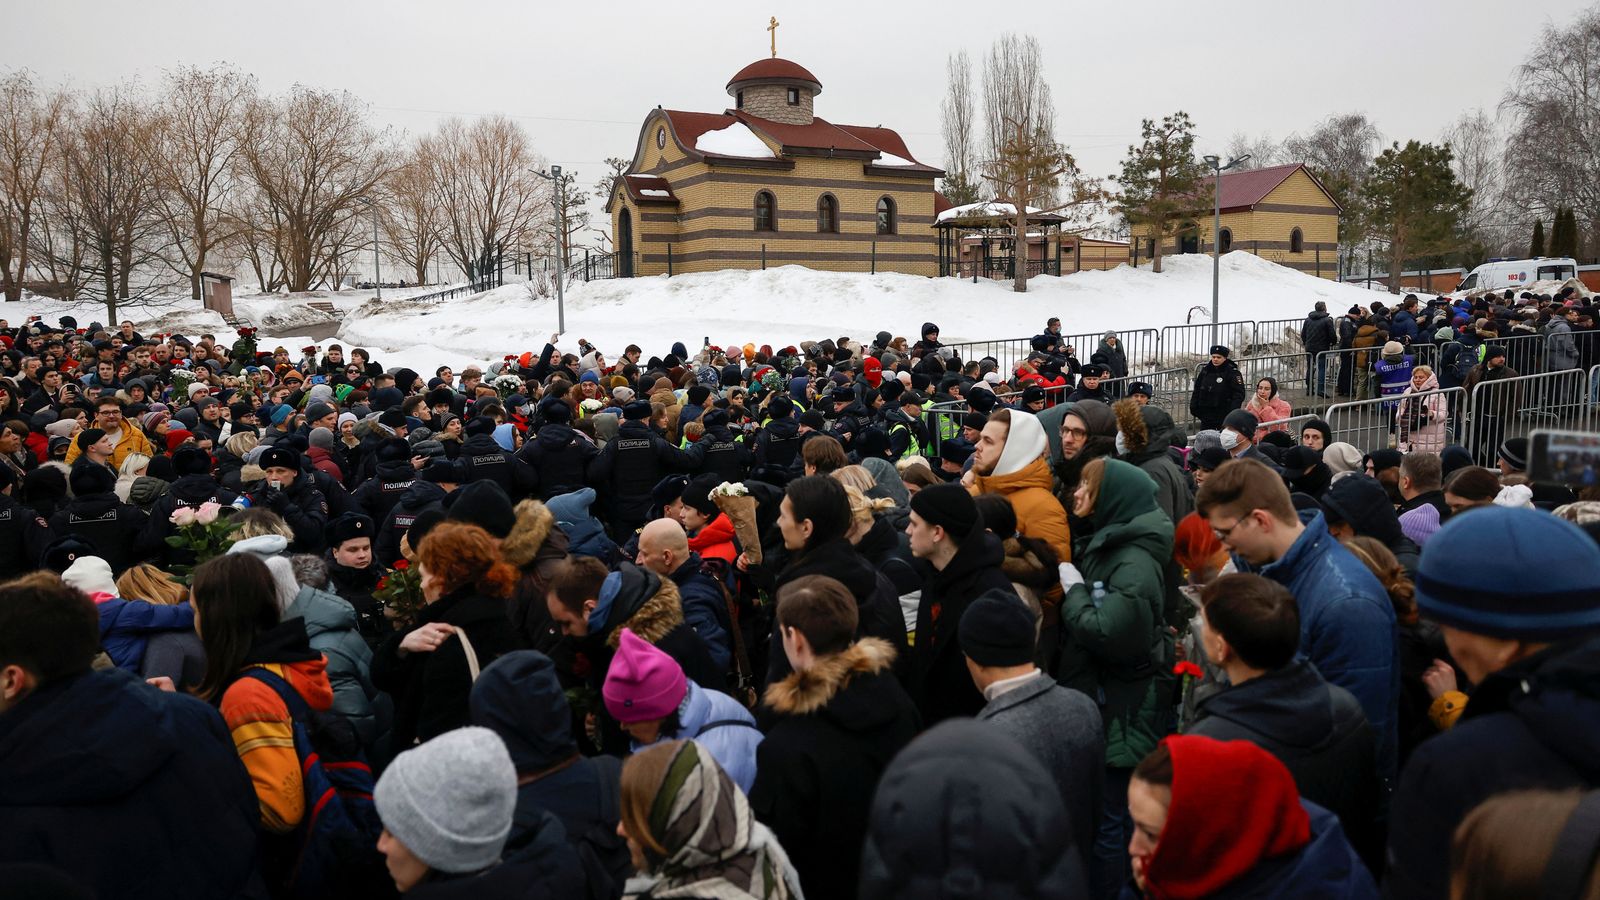 Alexei Navalny's funeral lifts spirits as many feared hope died with Russian opposition leader